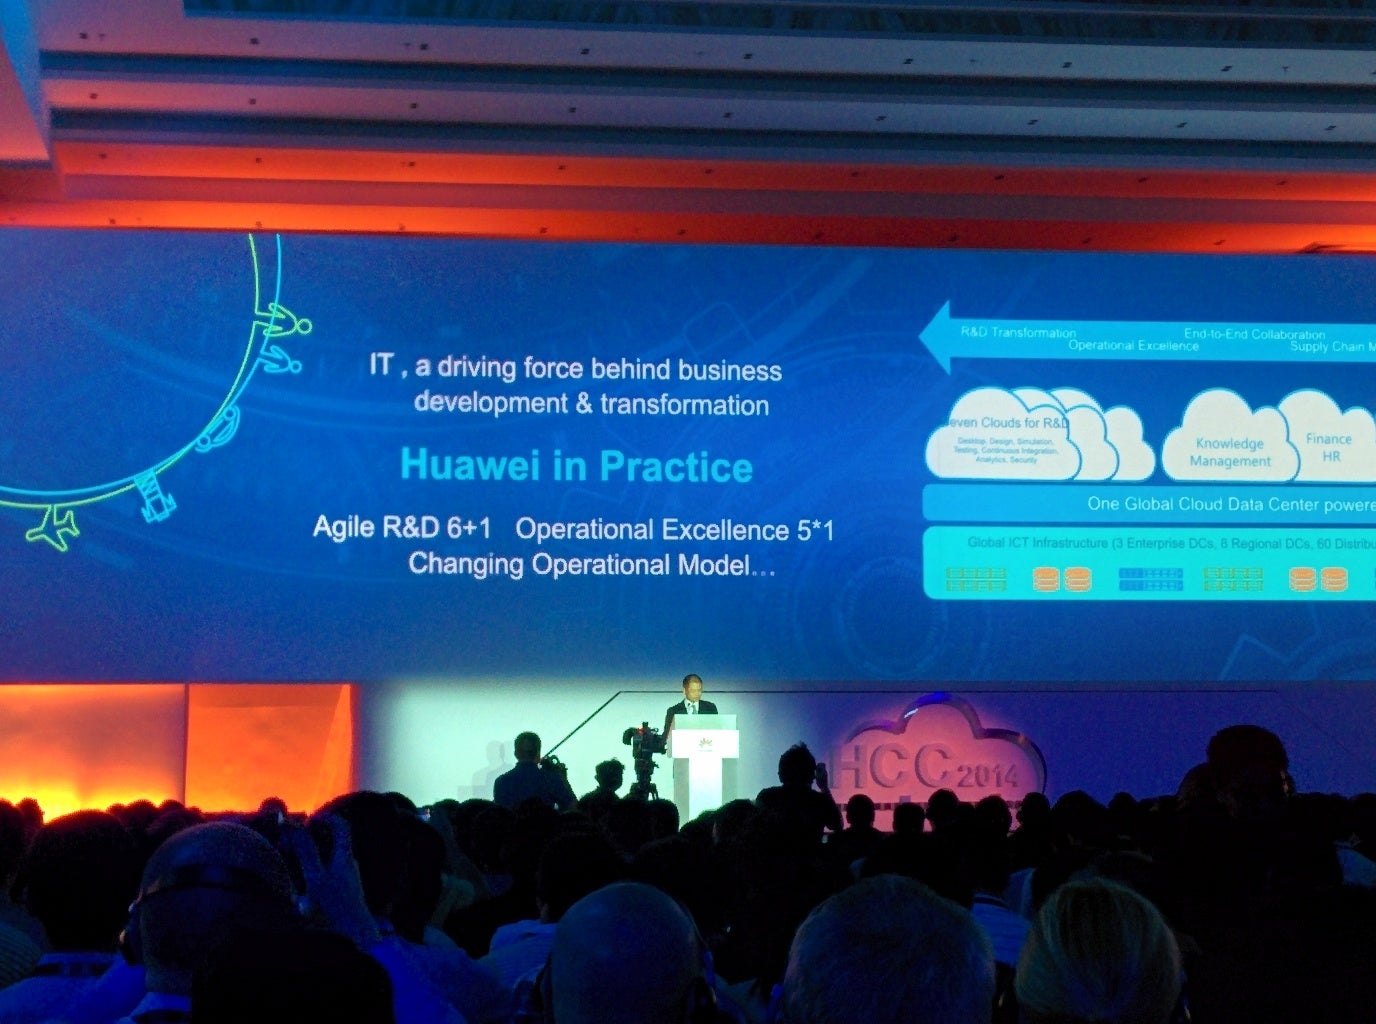 Huawei vies for cloud transparency and trust